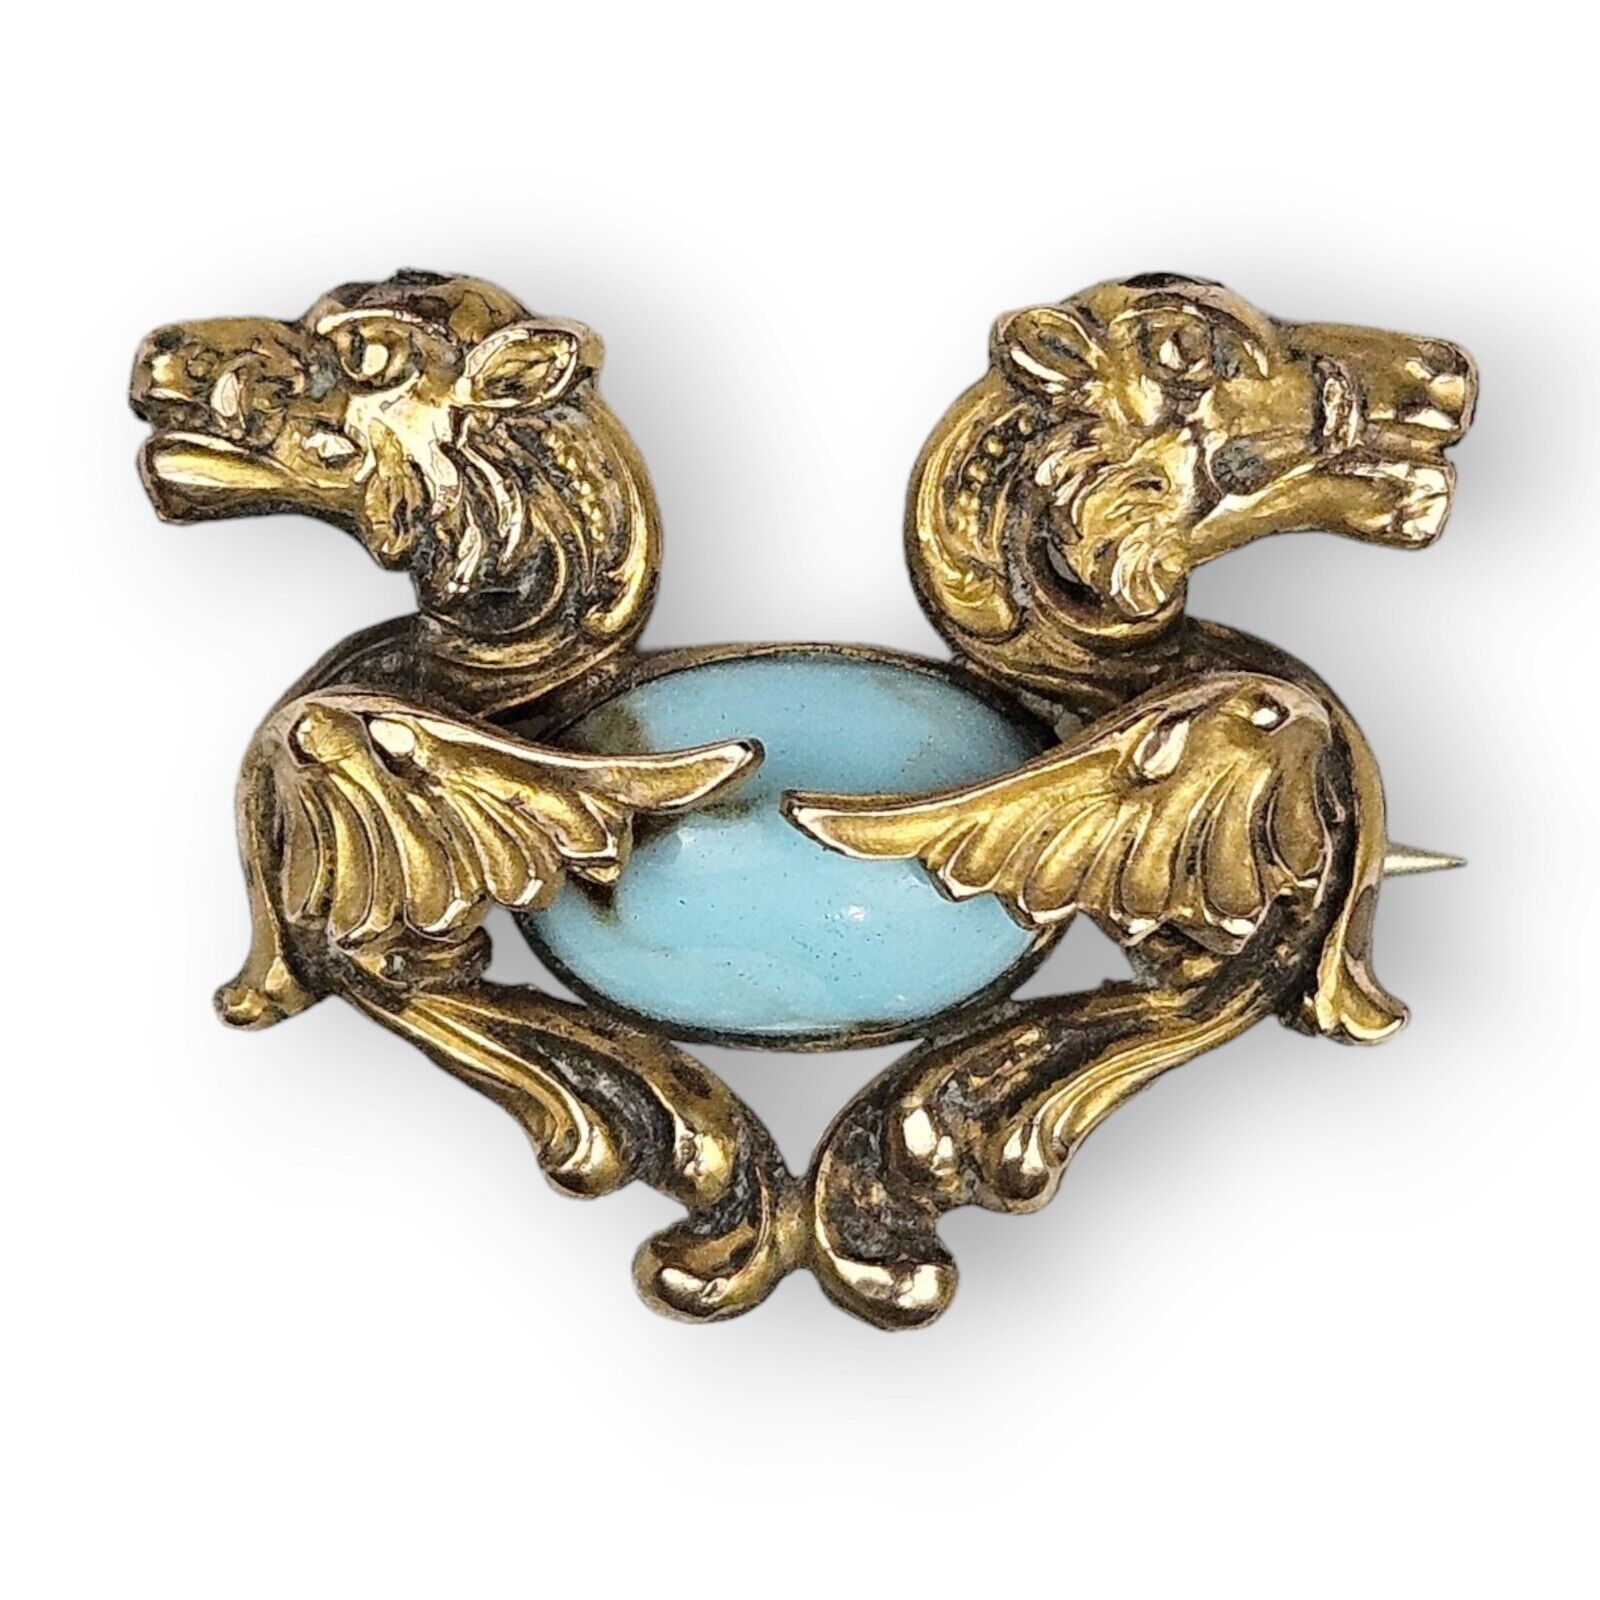 Antique Victorian Griffin Lion Brooch Gothic Revival Blue Stone Gold Filled FLAW